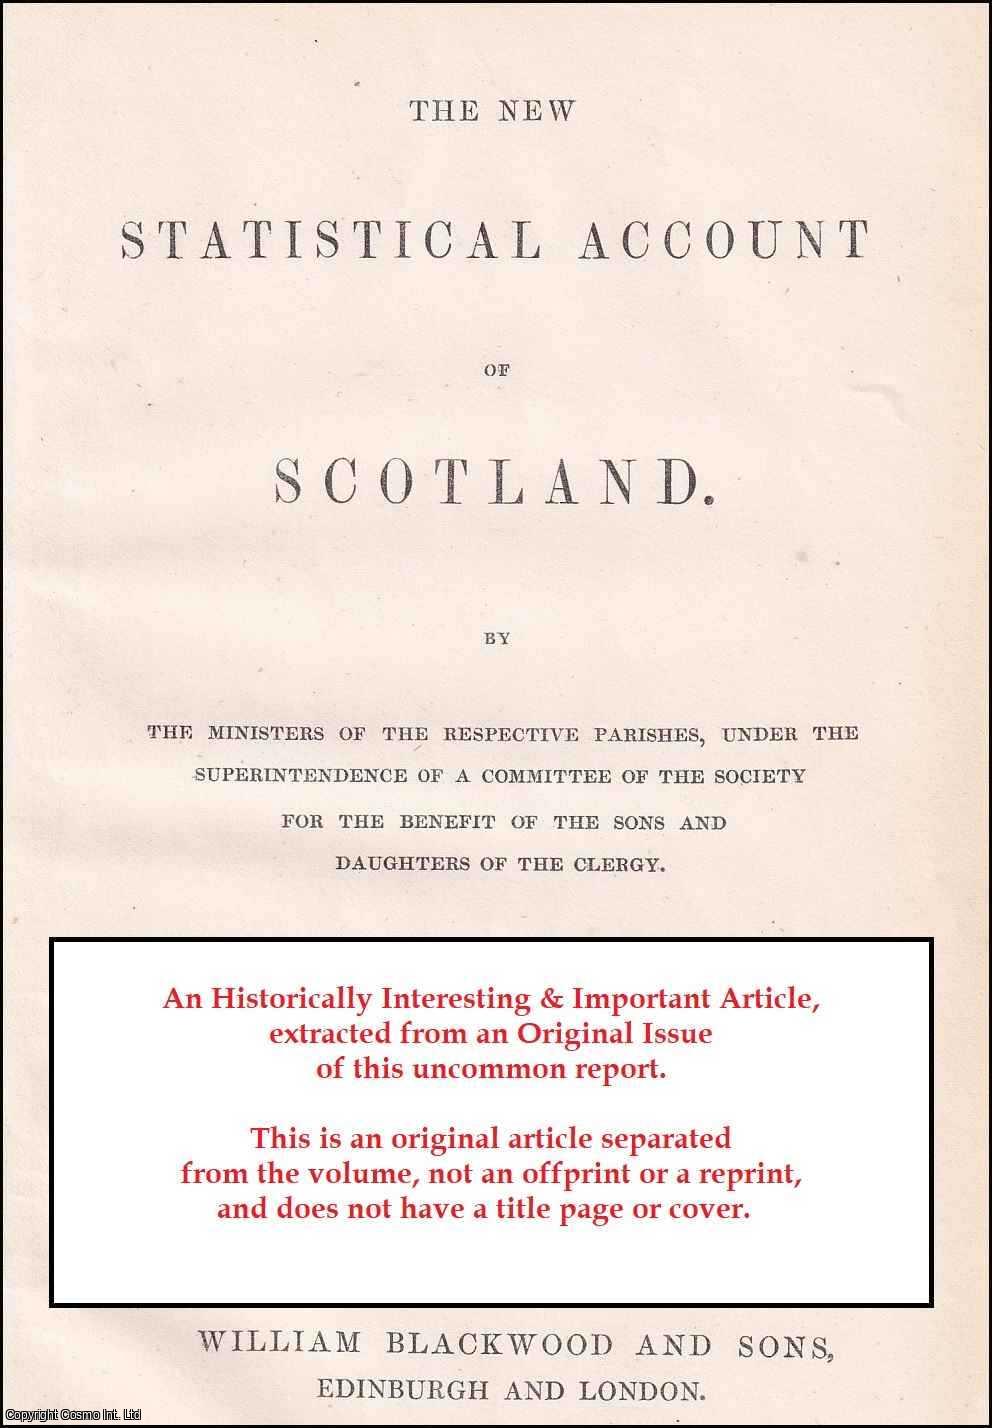 Rev. Dugald Campbell - Parish of Glassary. Presbytery of Inverary, Synod of Argyle. An uncommon original article from The New Statistical Account of Scotland, 1845.